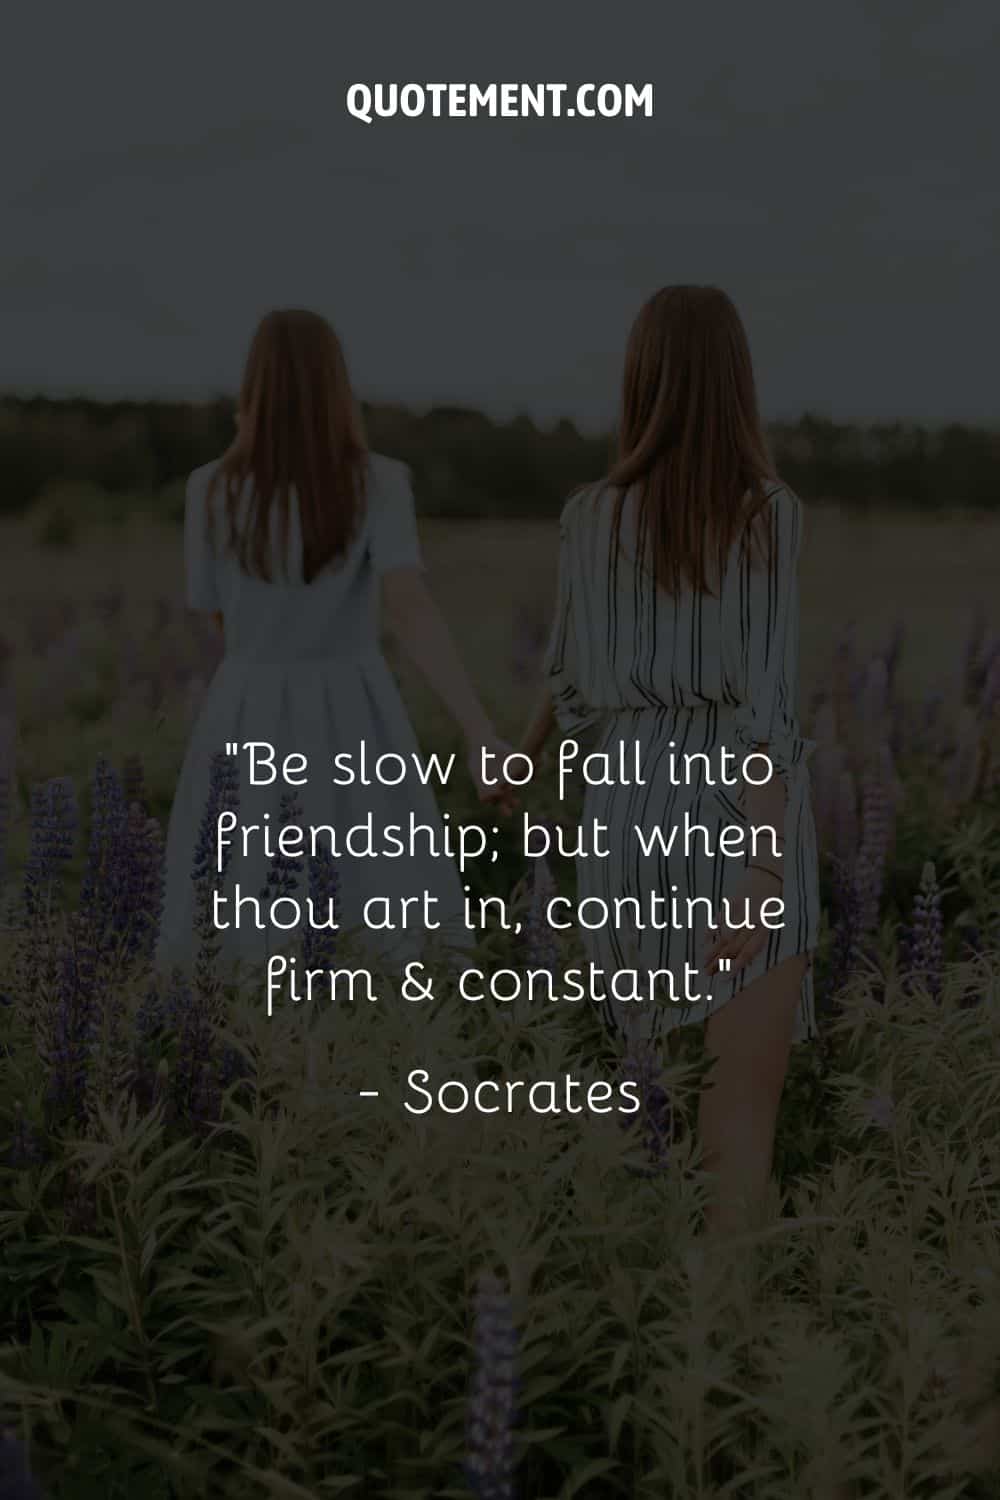 “Be slow to fall into friendship; but when thou art in, continue firm & constant.” — Socrates